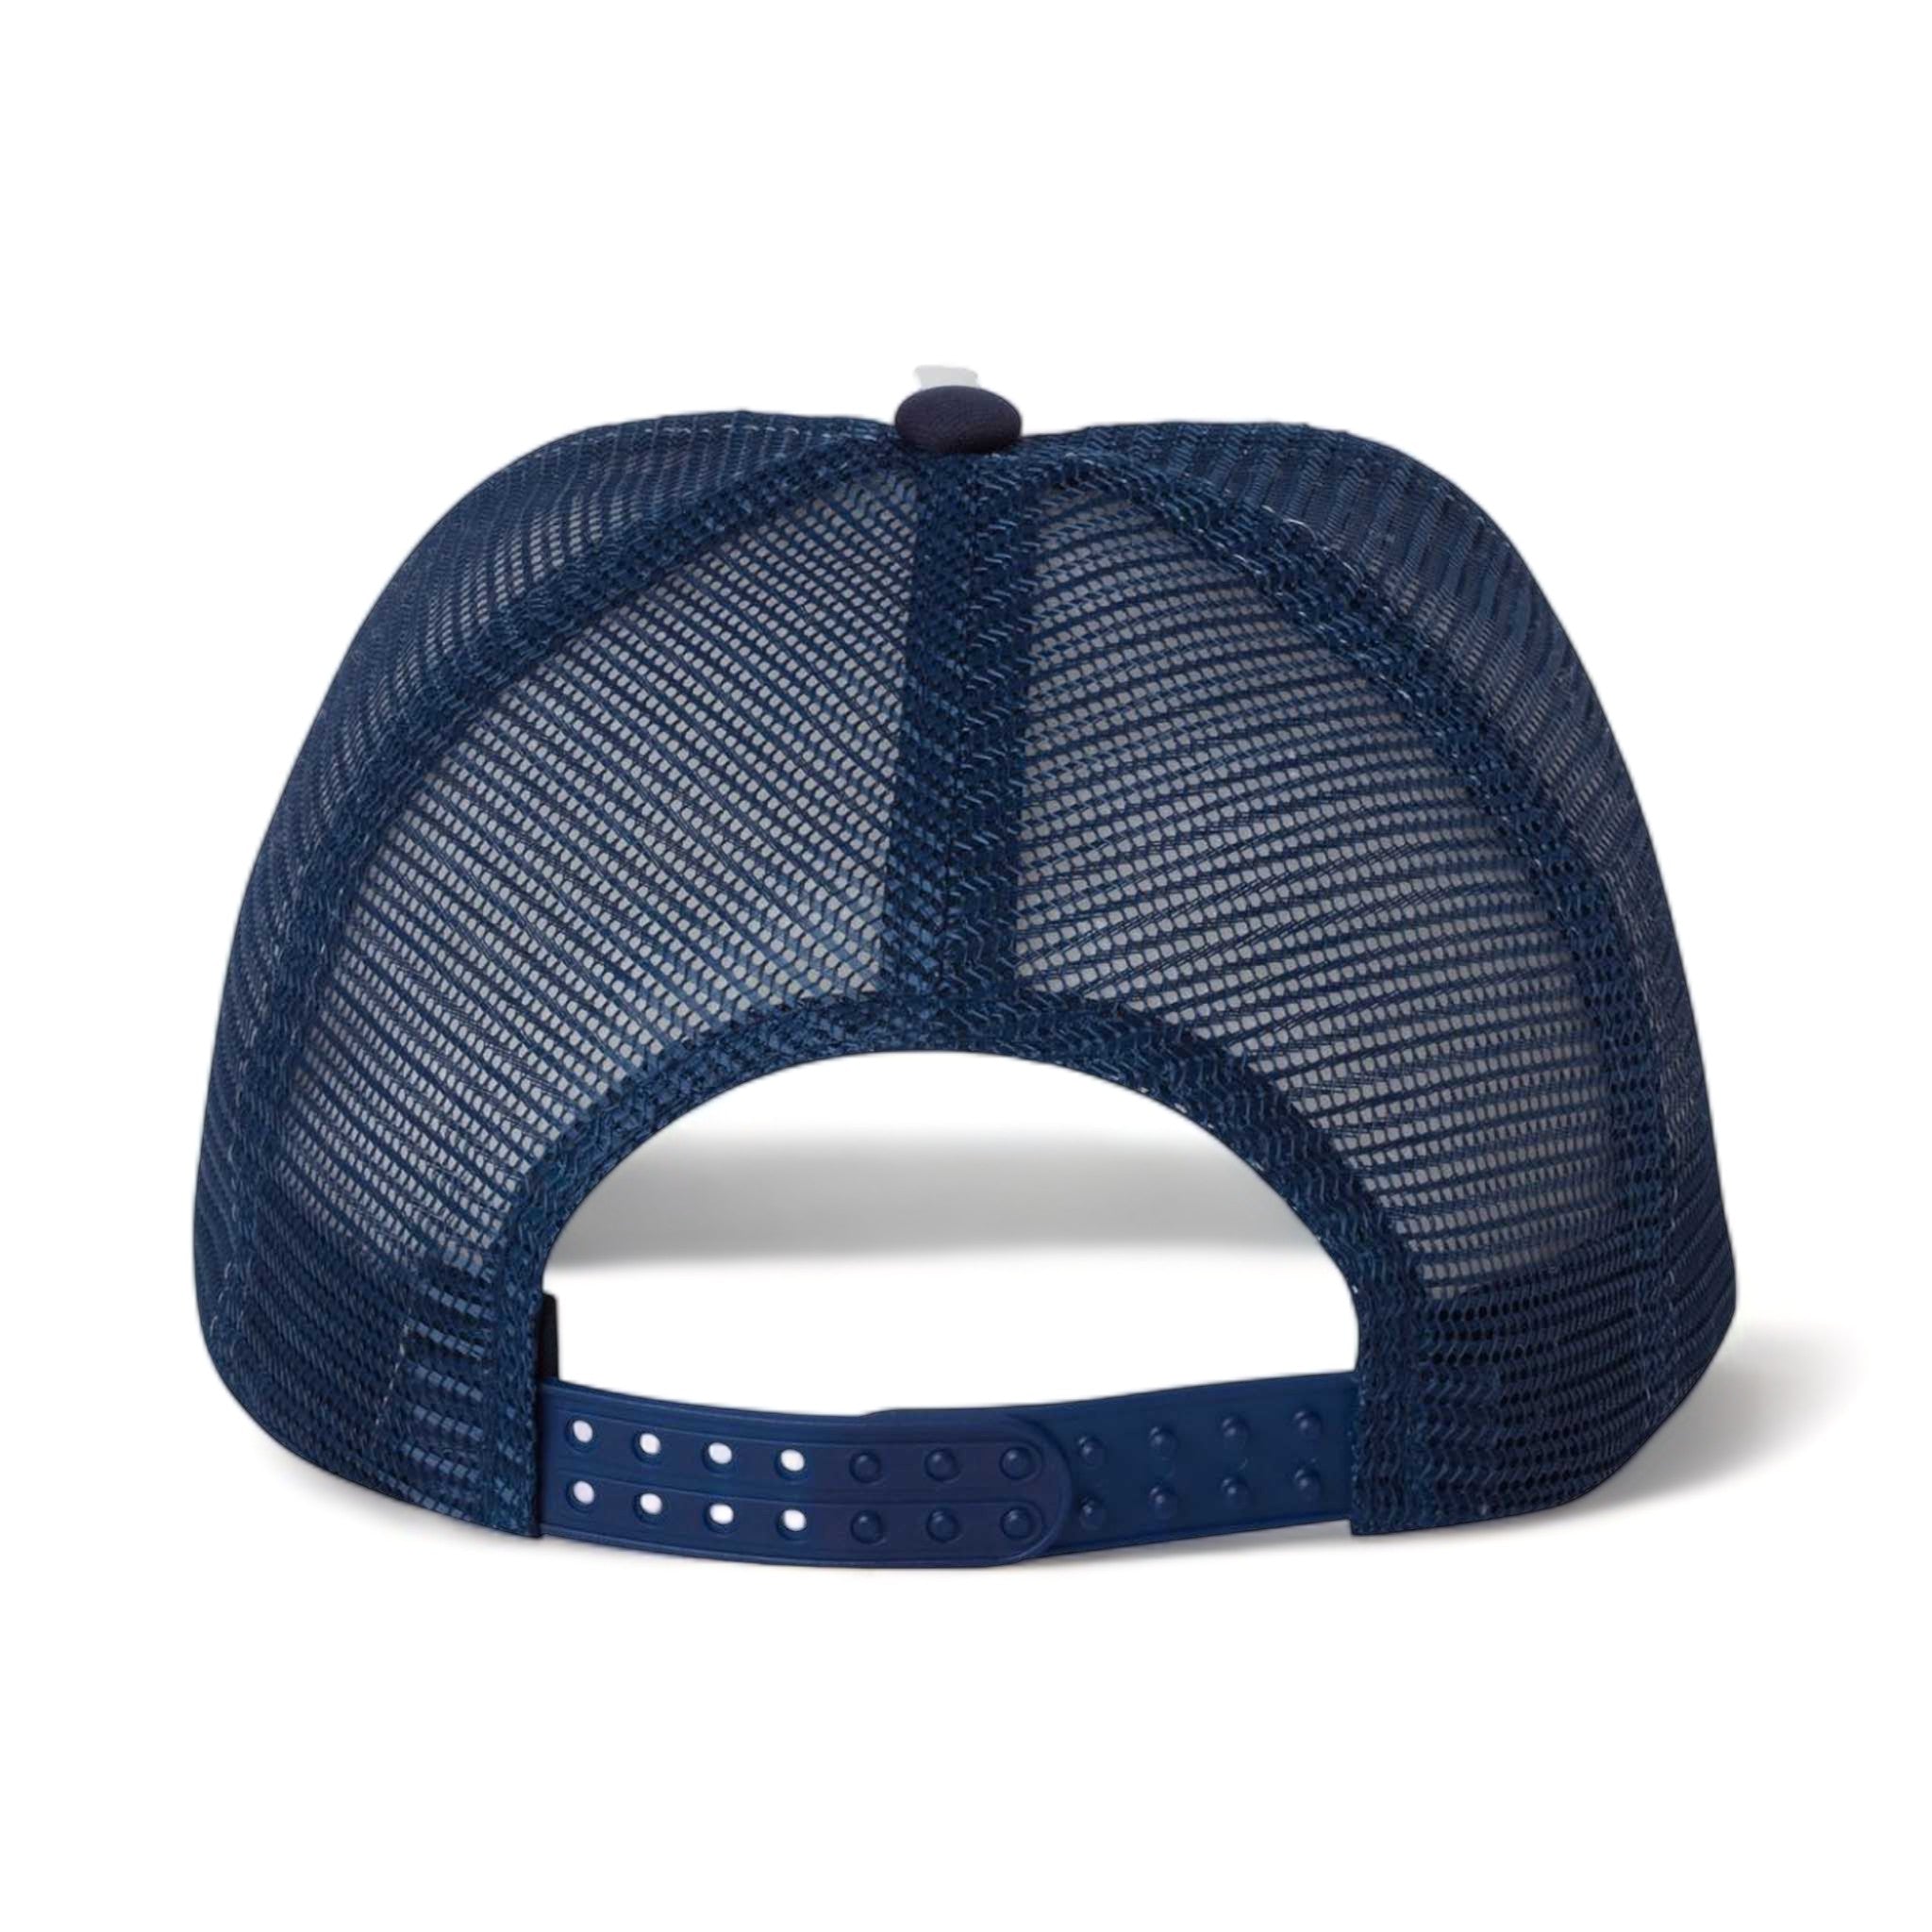 Back view of Valucap VC700 custom hat in white and navy